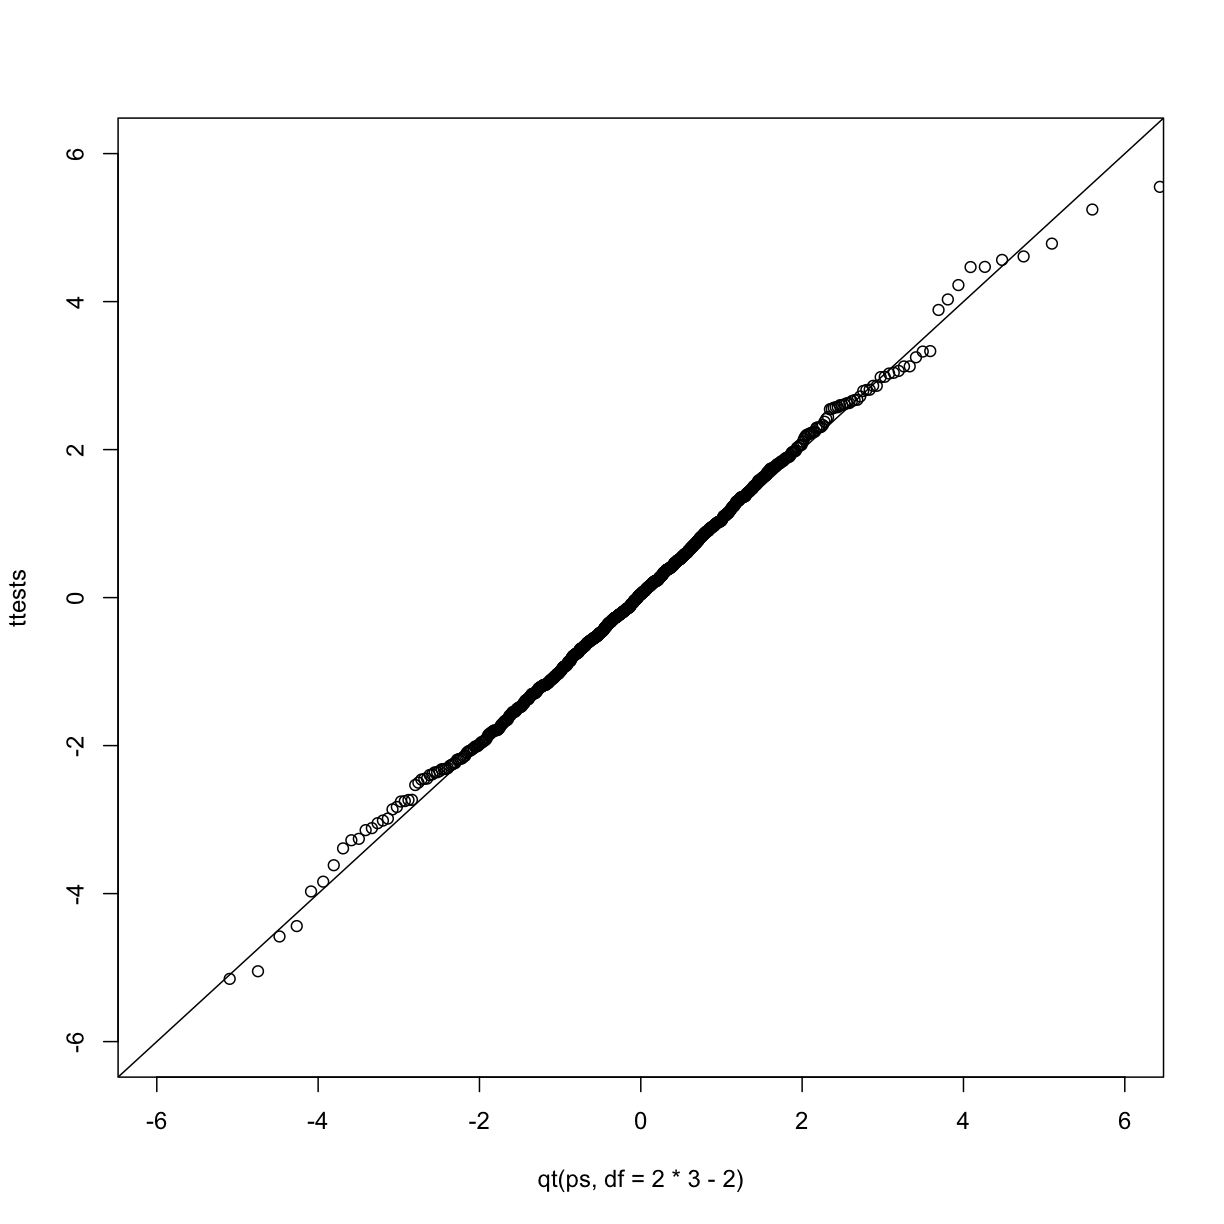 Quantile-quantile plot comparing 1000 Monte Carlo simulated t-statistics with three degrees of freedom to theoretical t-distribution.